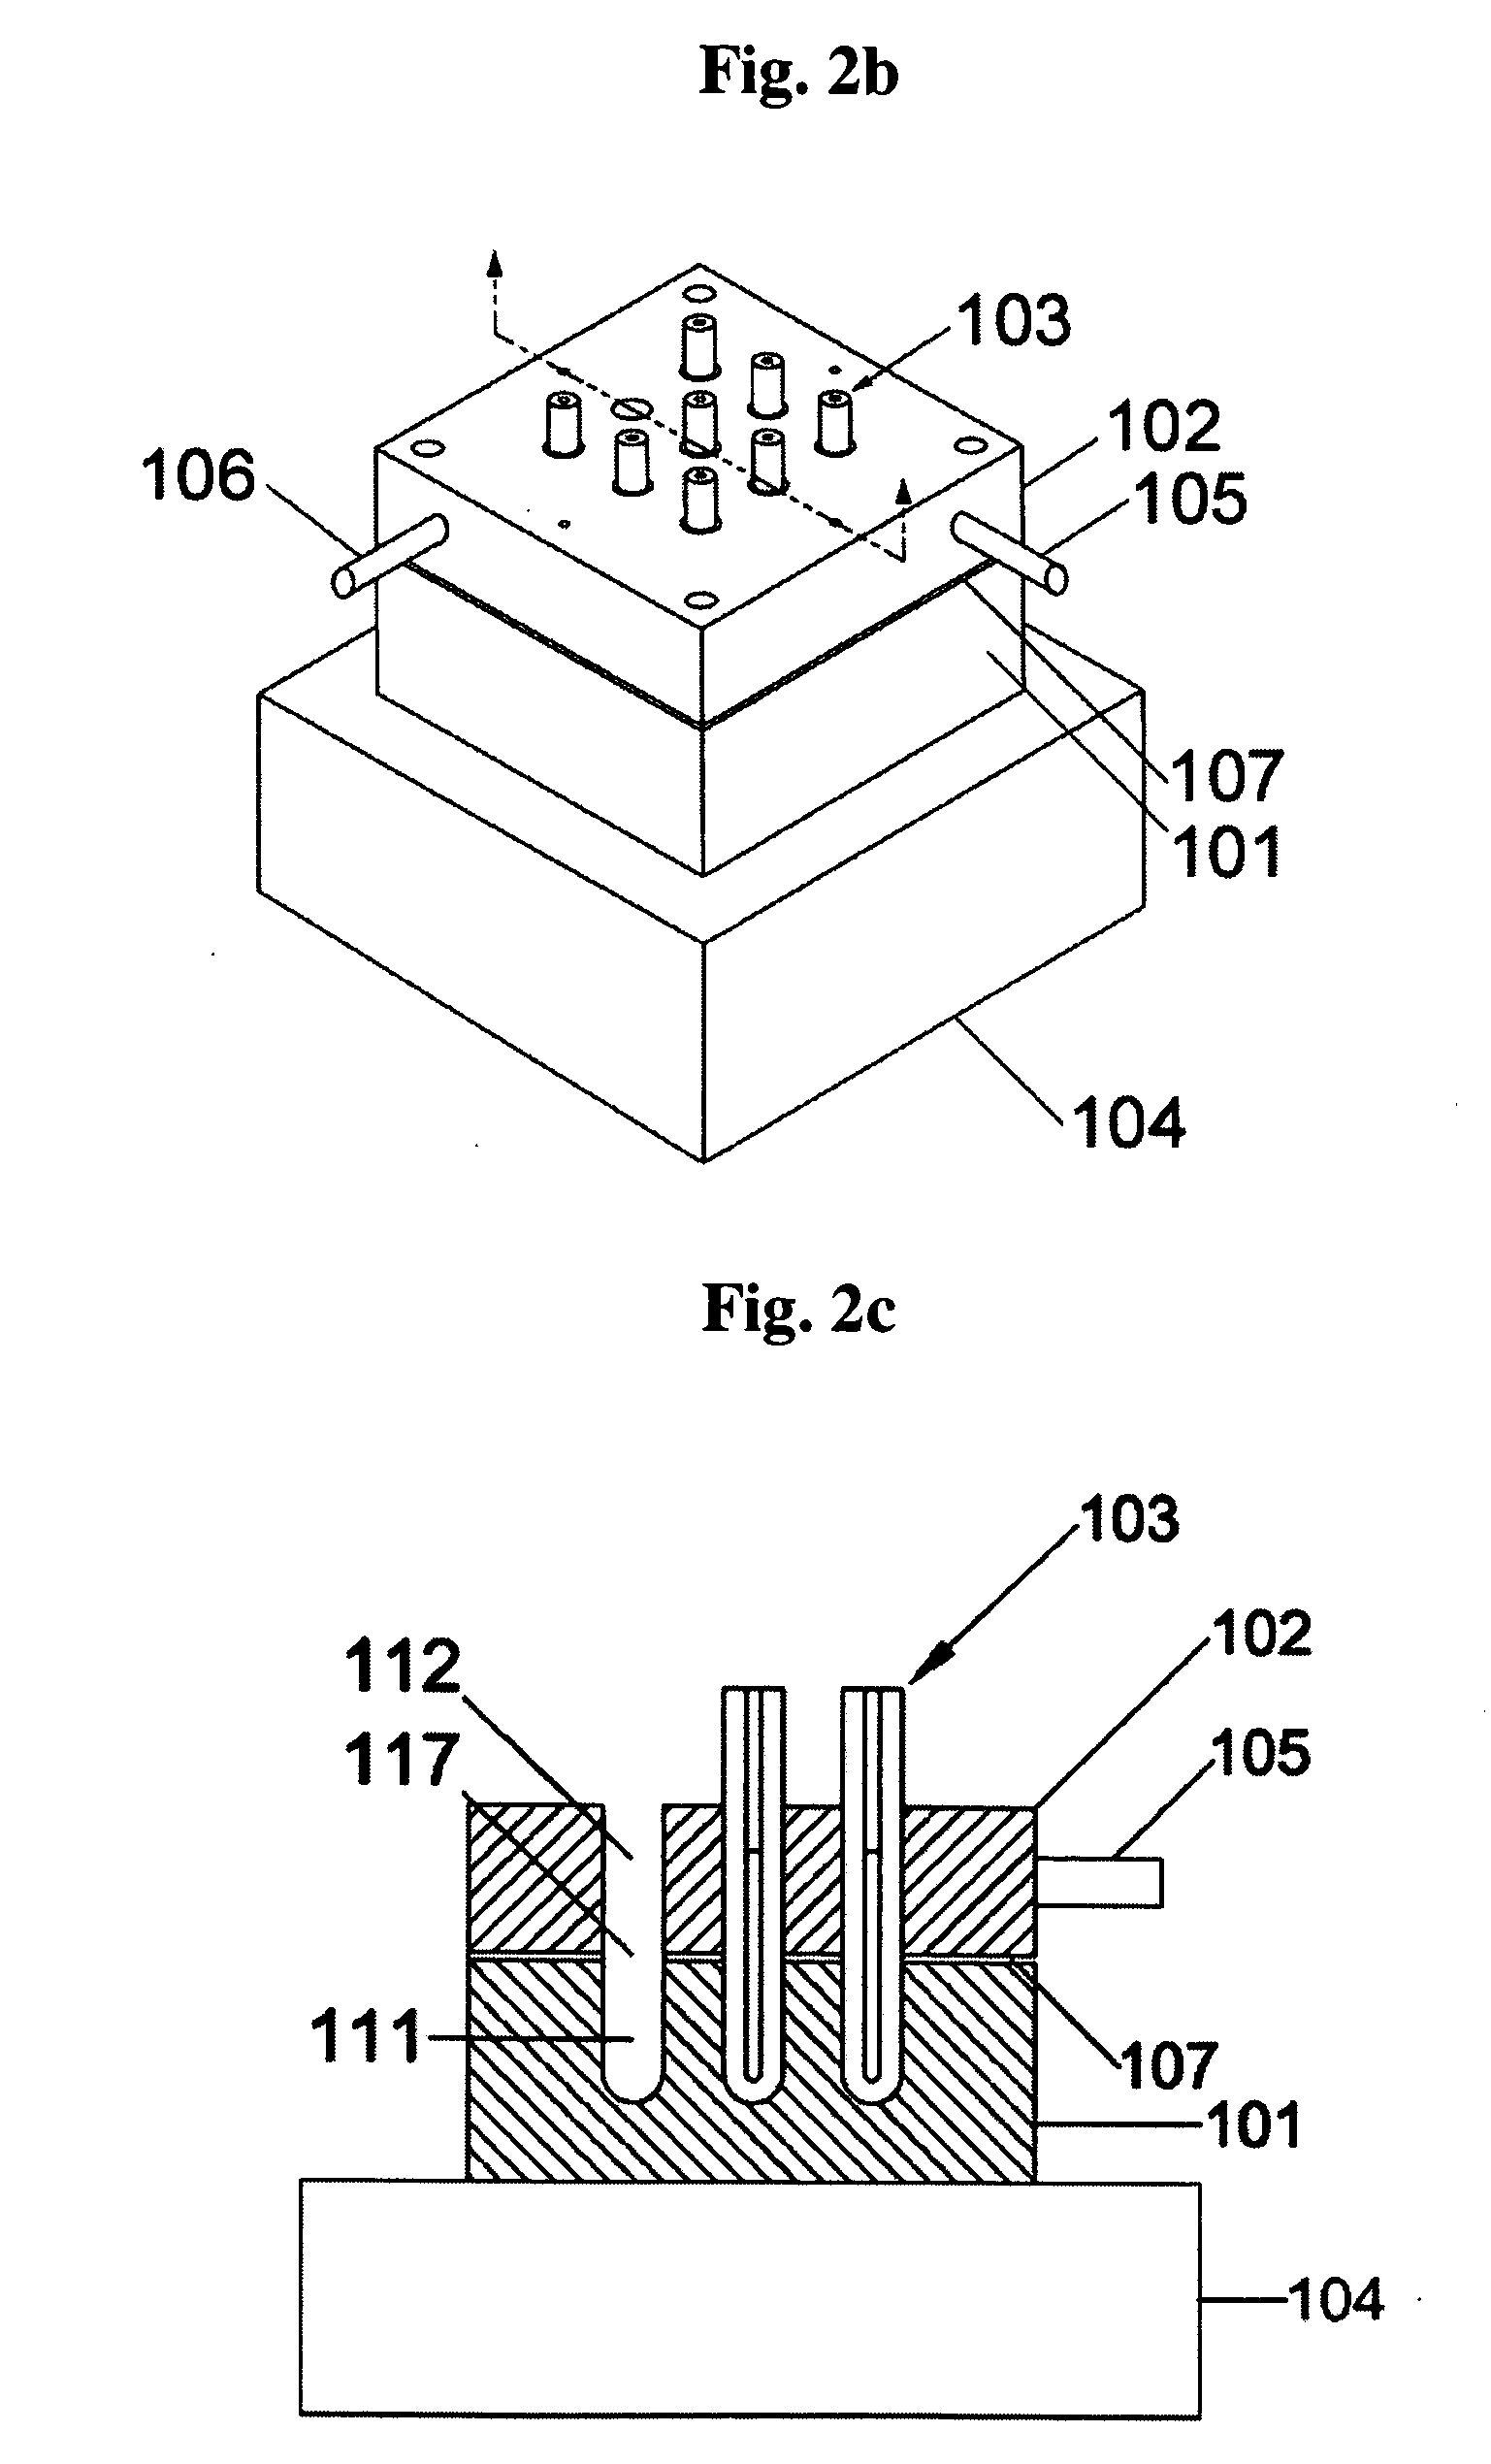 Method and apparatus for amplification of nucleic acid sequences using immobilized DNA polymerase